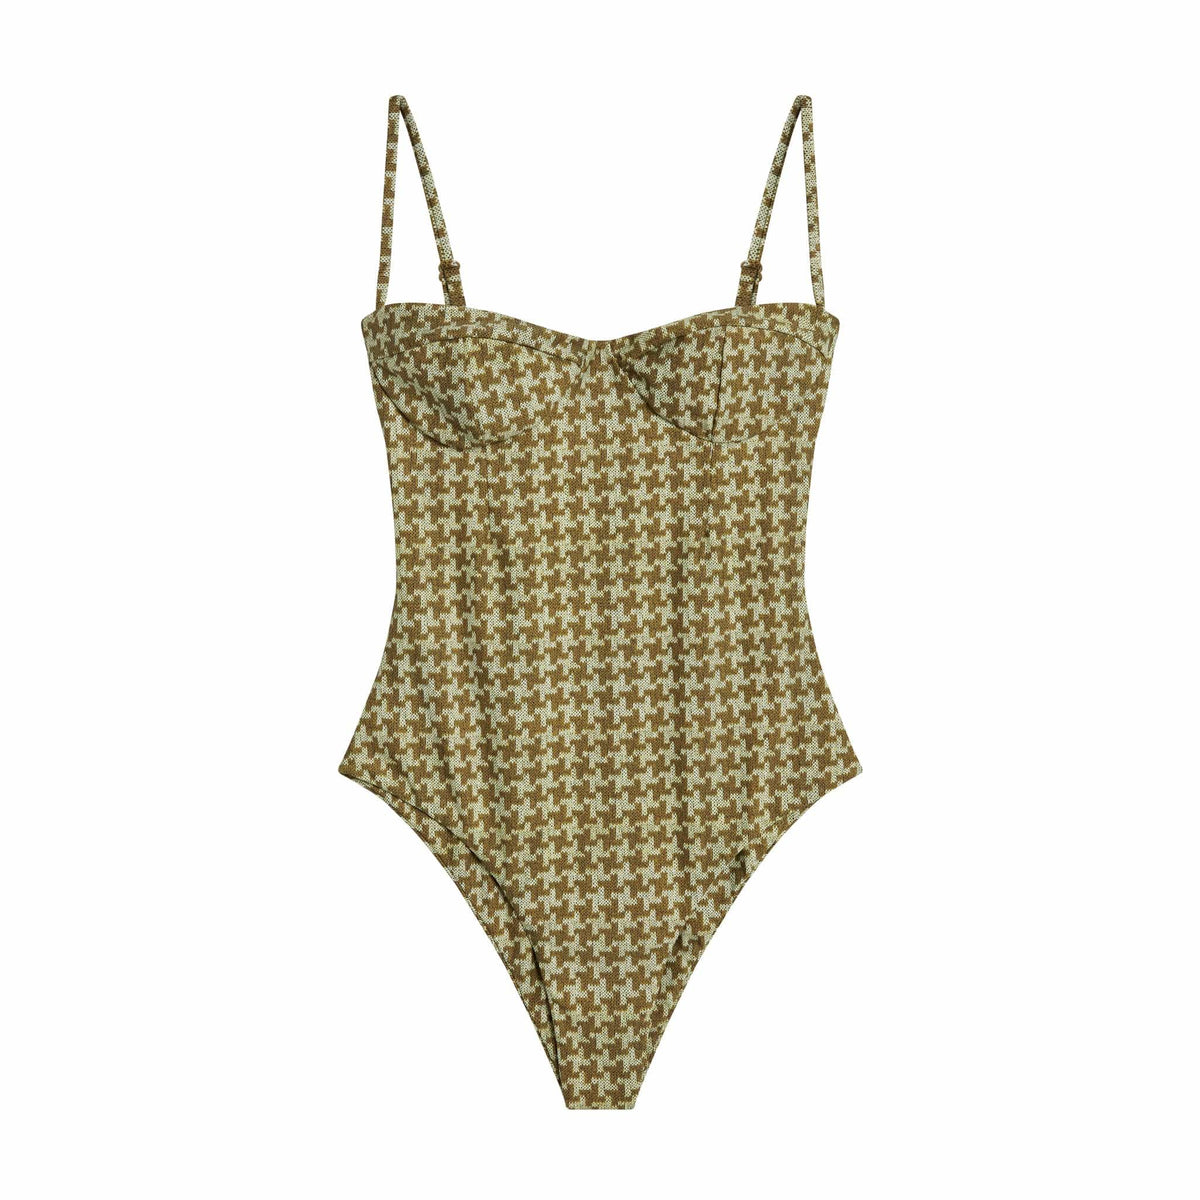 The Bowie One Piece in Houndstooth